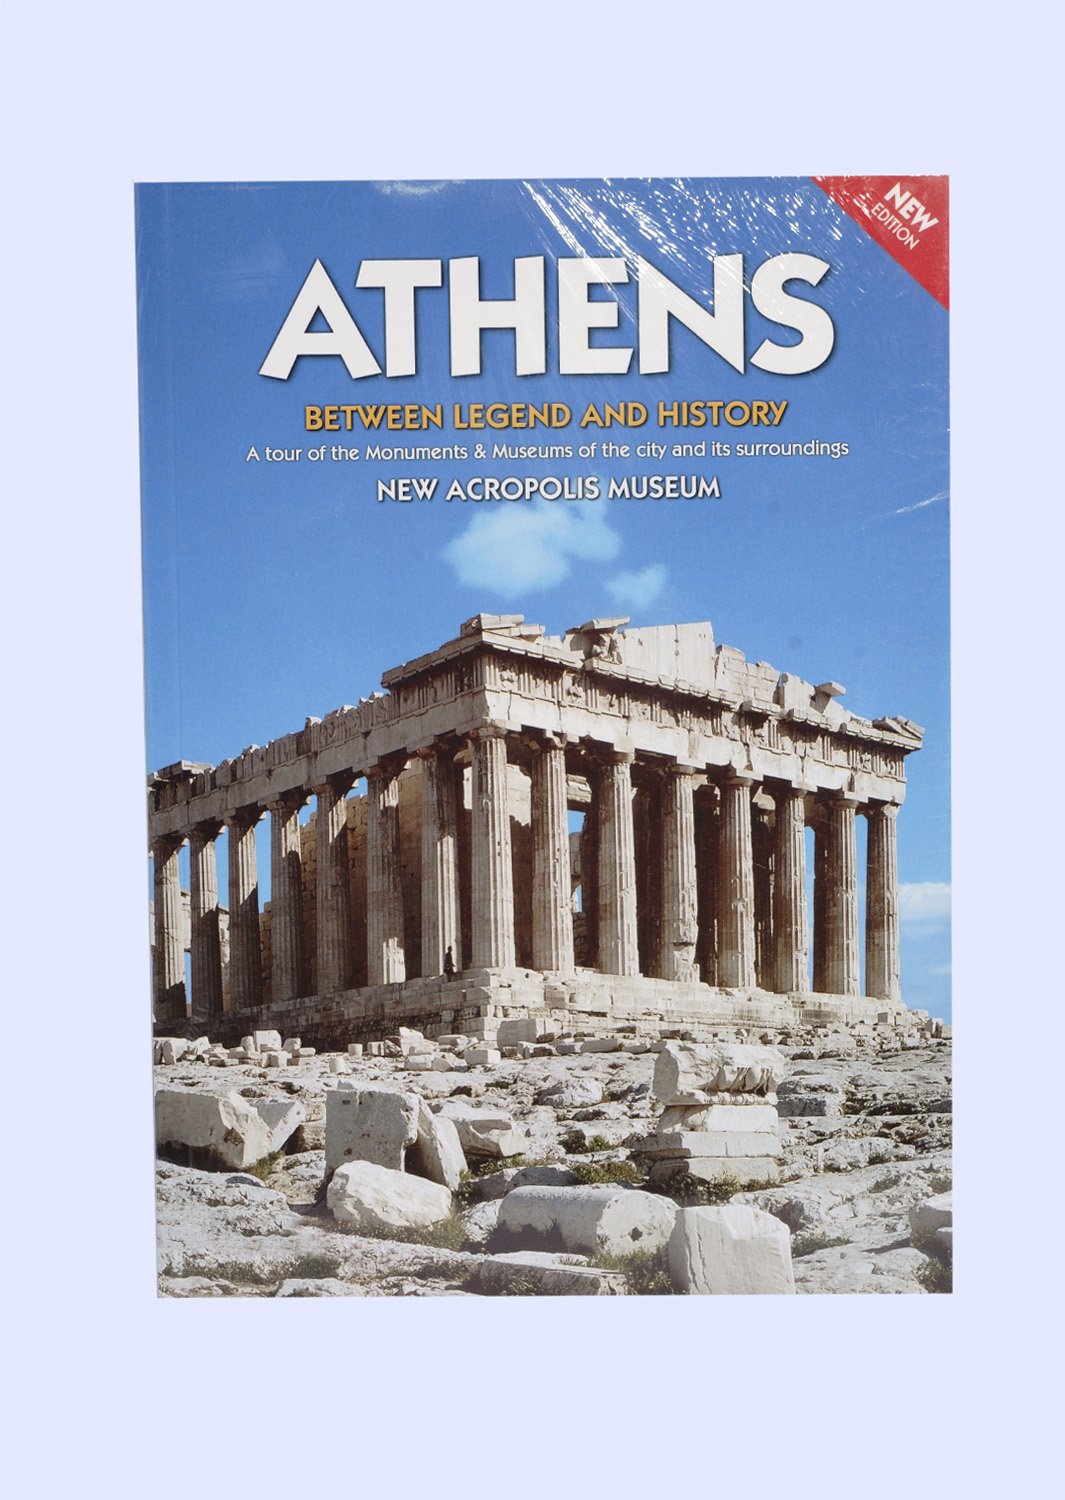 Athens, between legend and history book